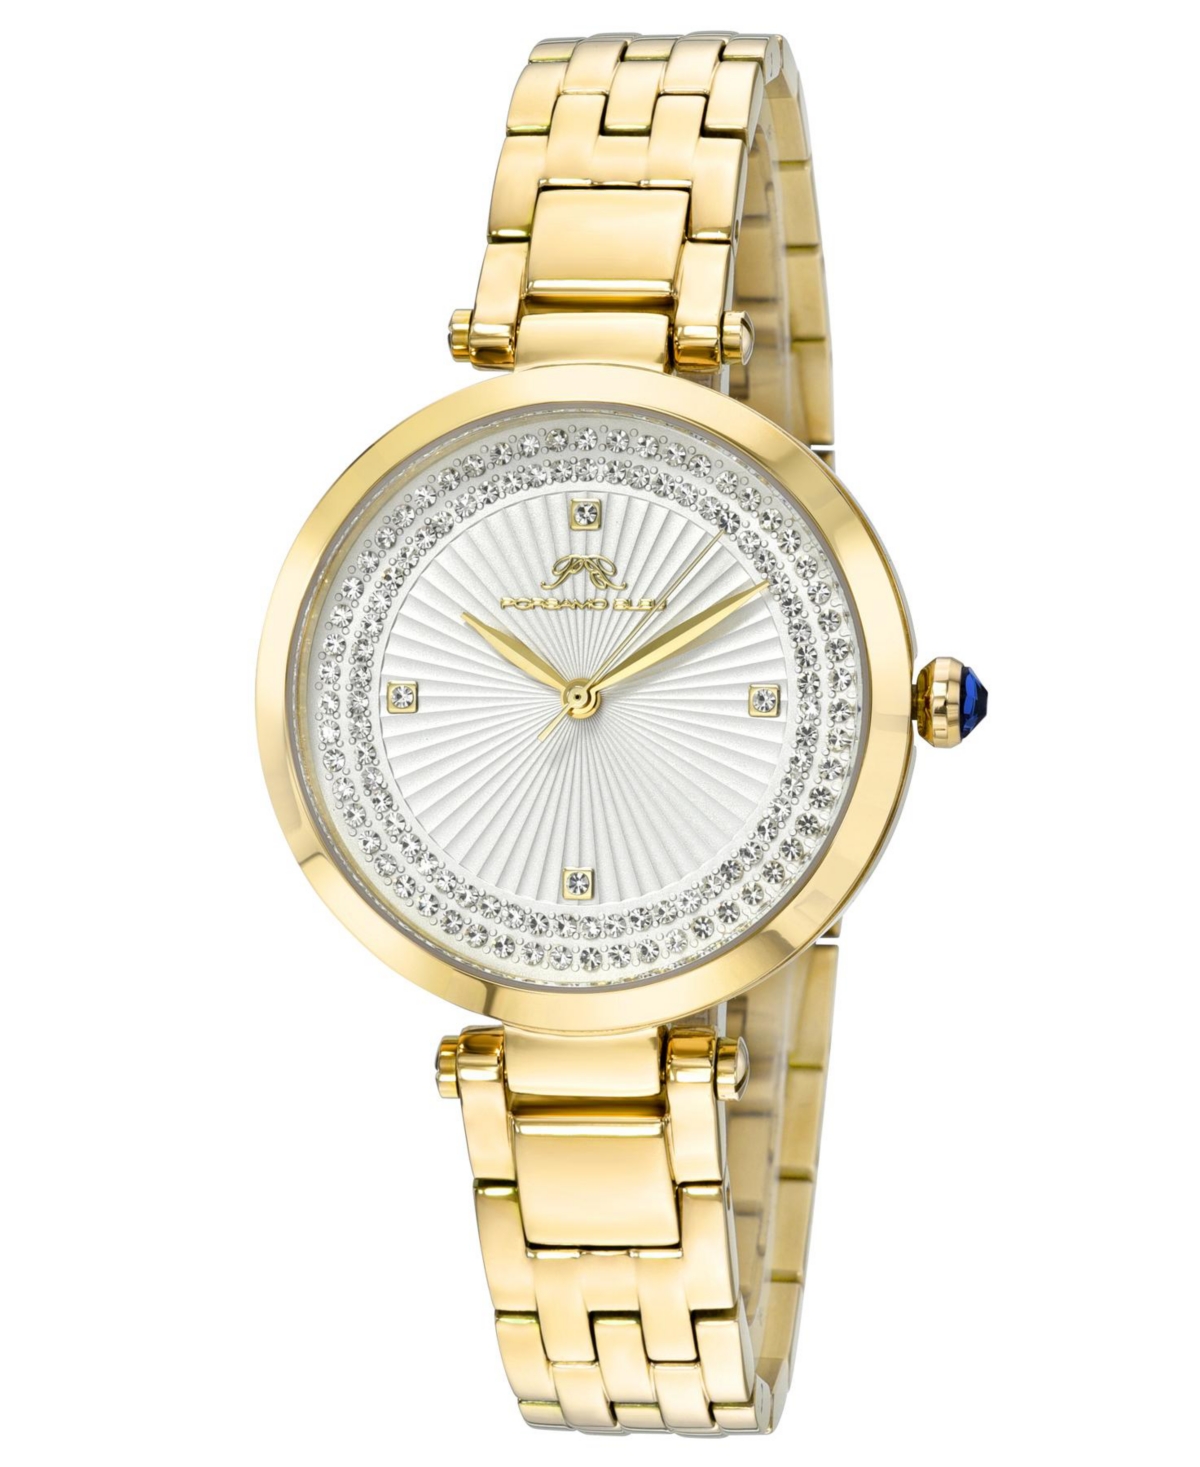 Natalie Stainless Steel Gold Tone Women's Watch - Gold